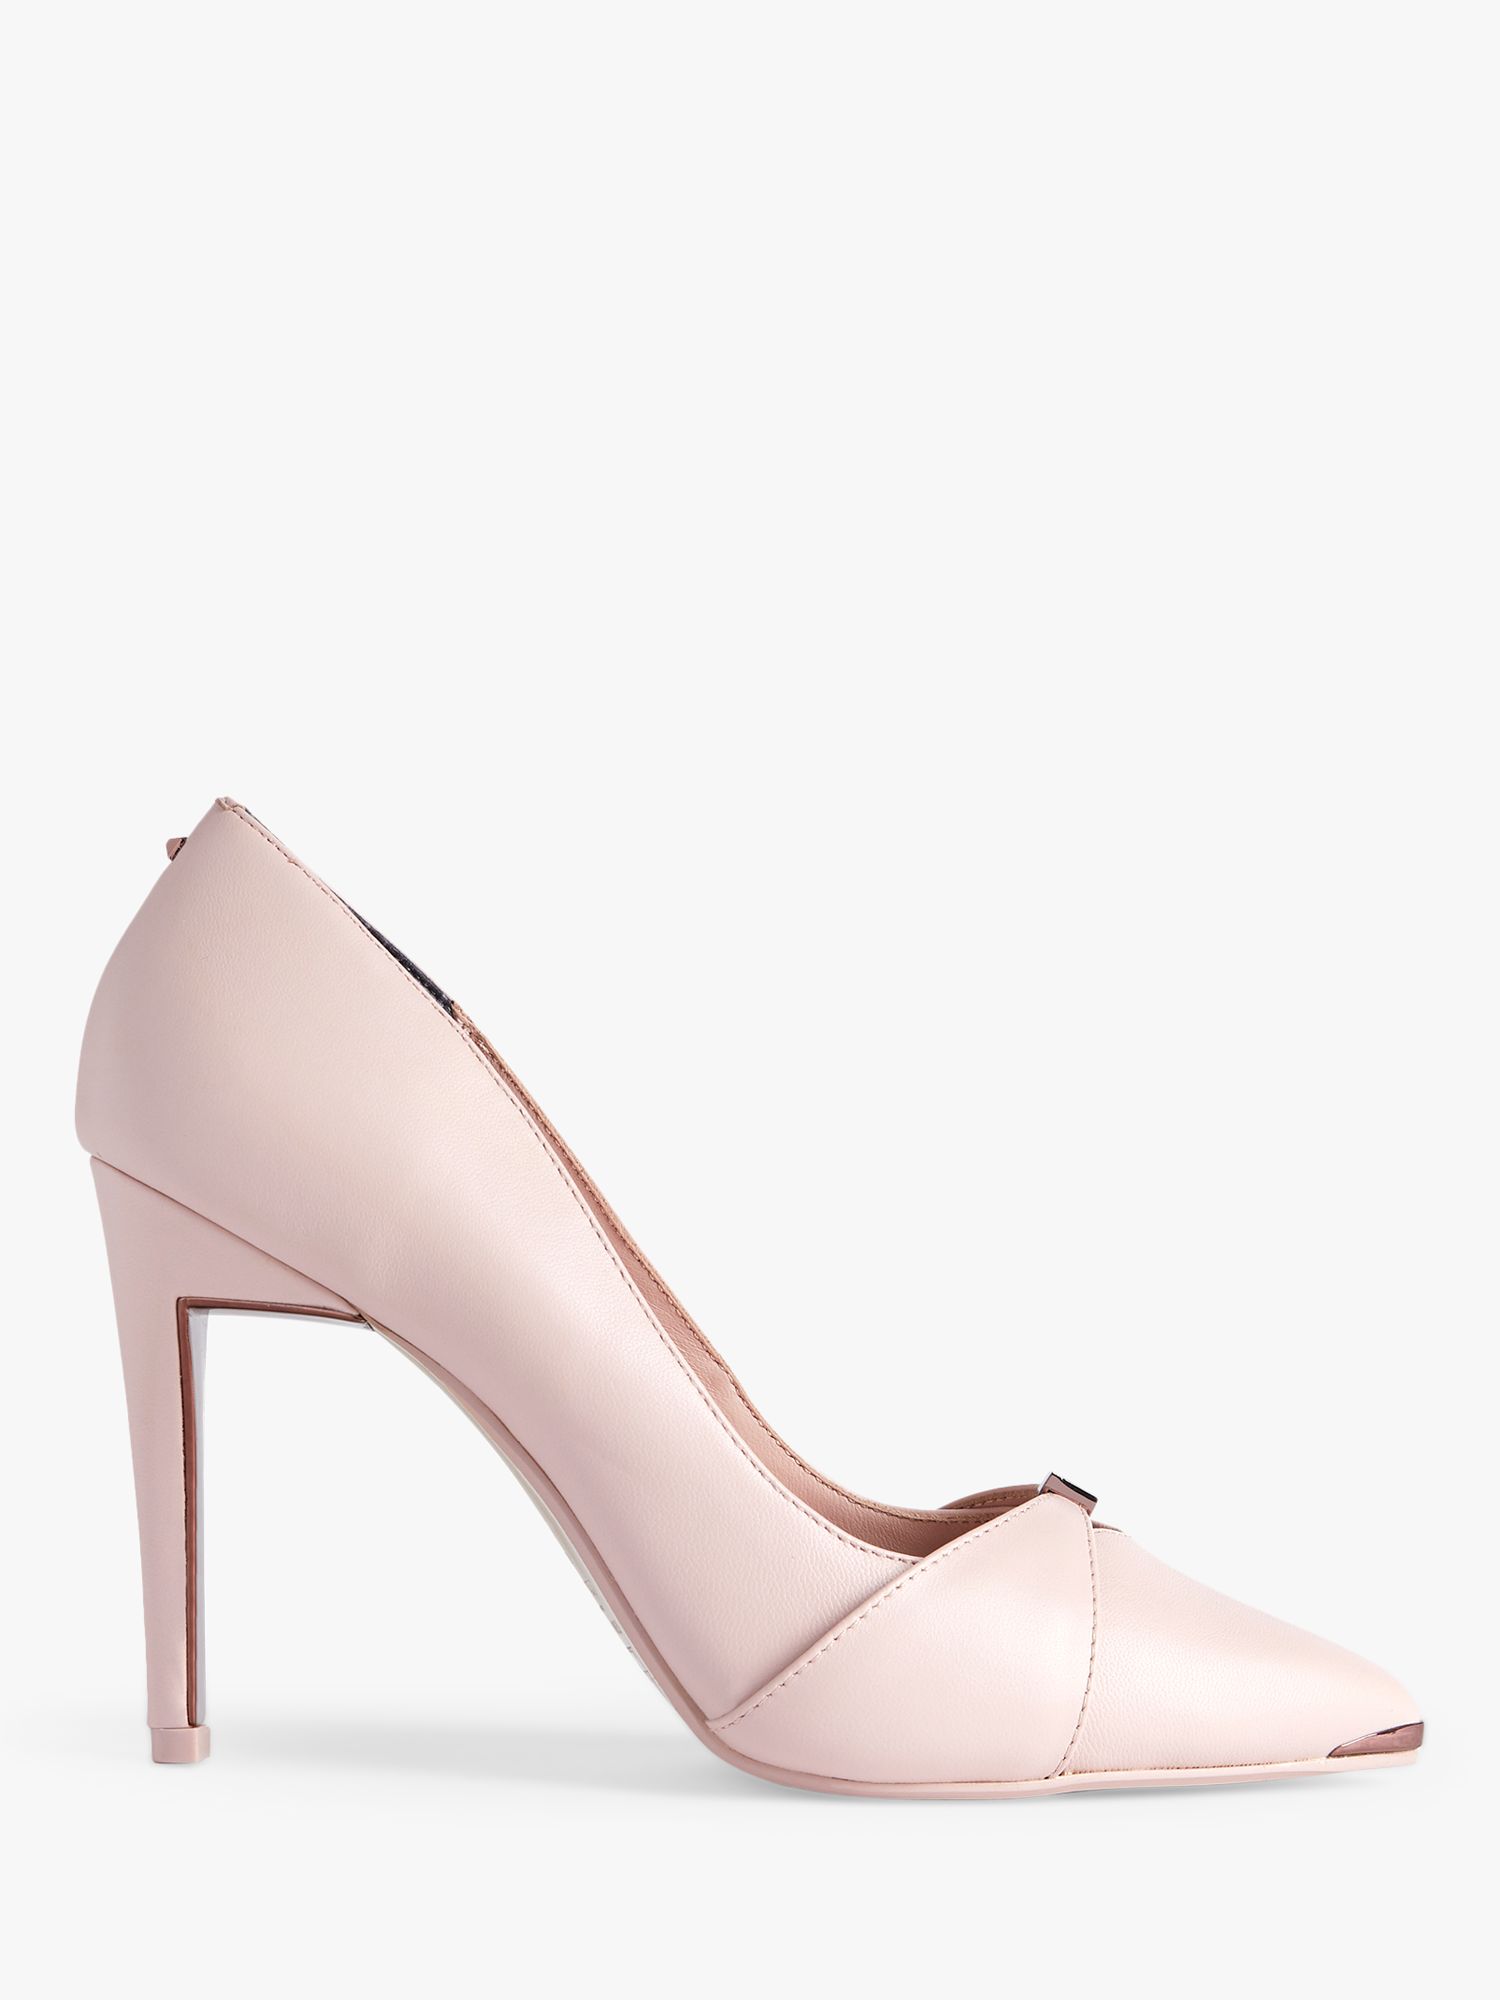 Ted Baker Axealil Leather Stiletto Court Shoes, Pink